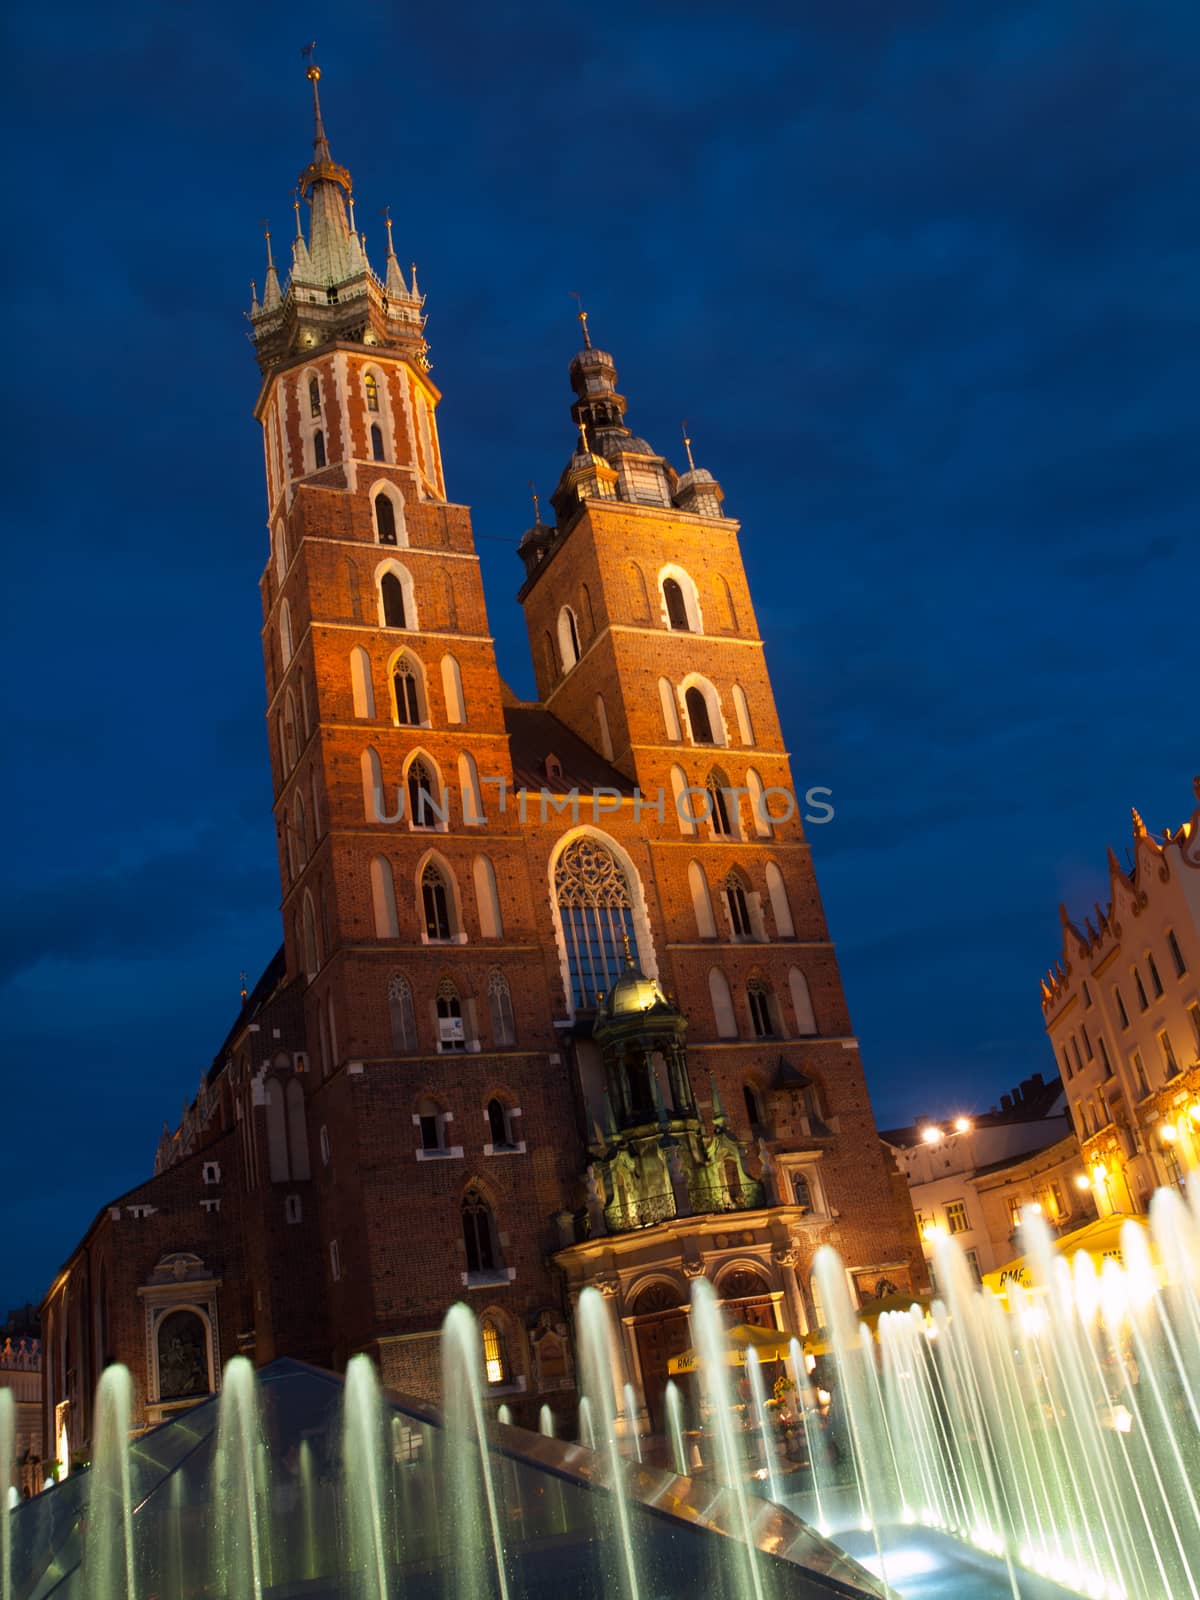 St. Mary's Church with two different towers by night (Krakow, Poland). Viewed from fountain.